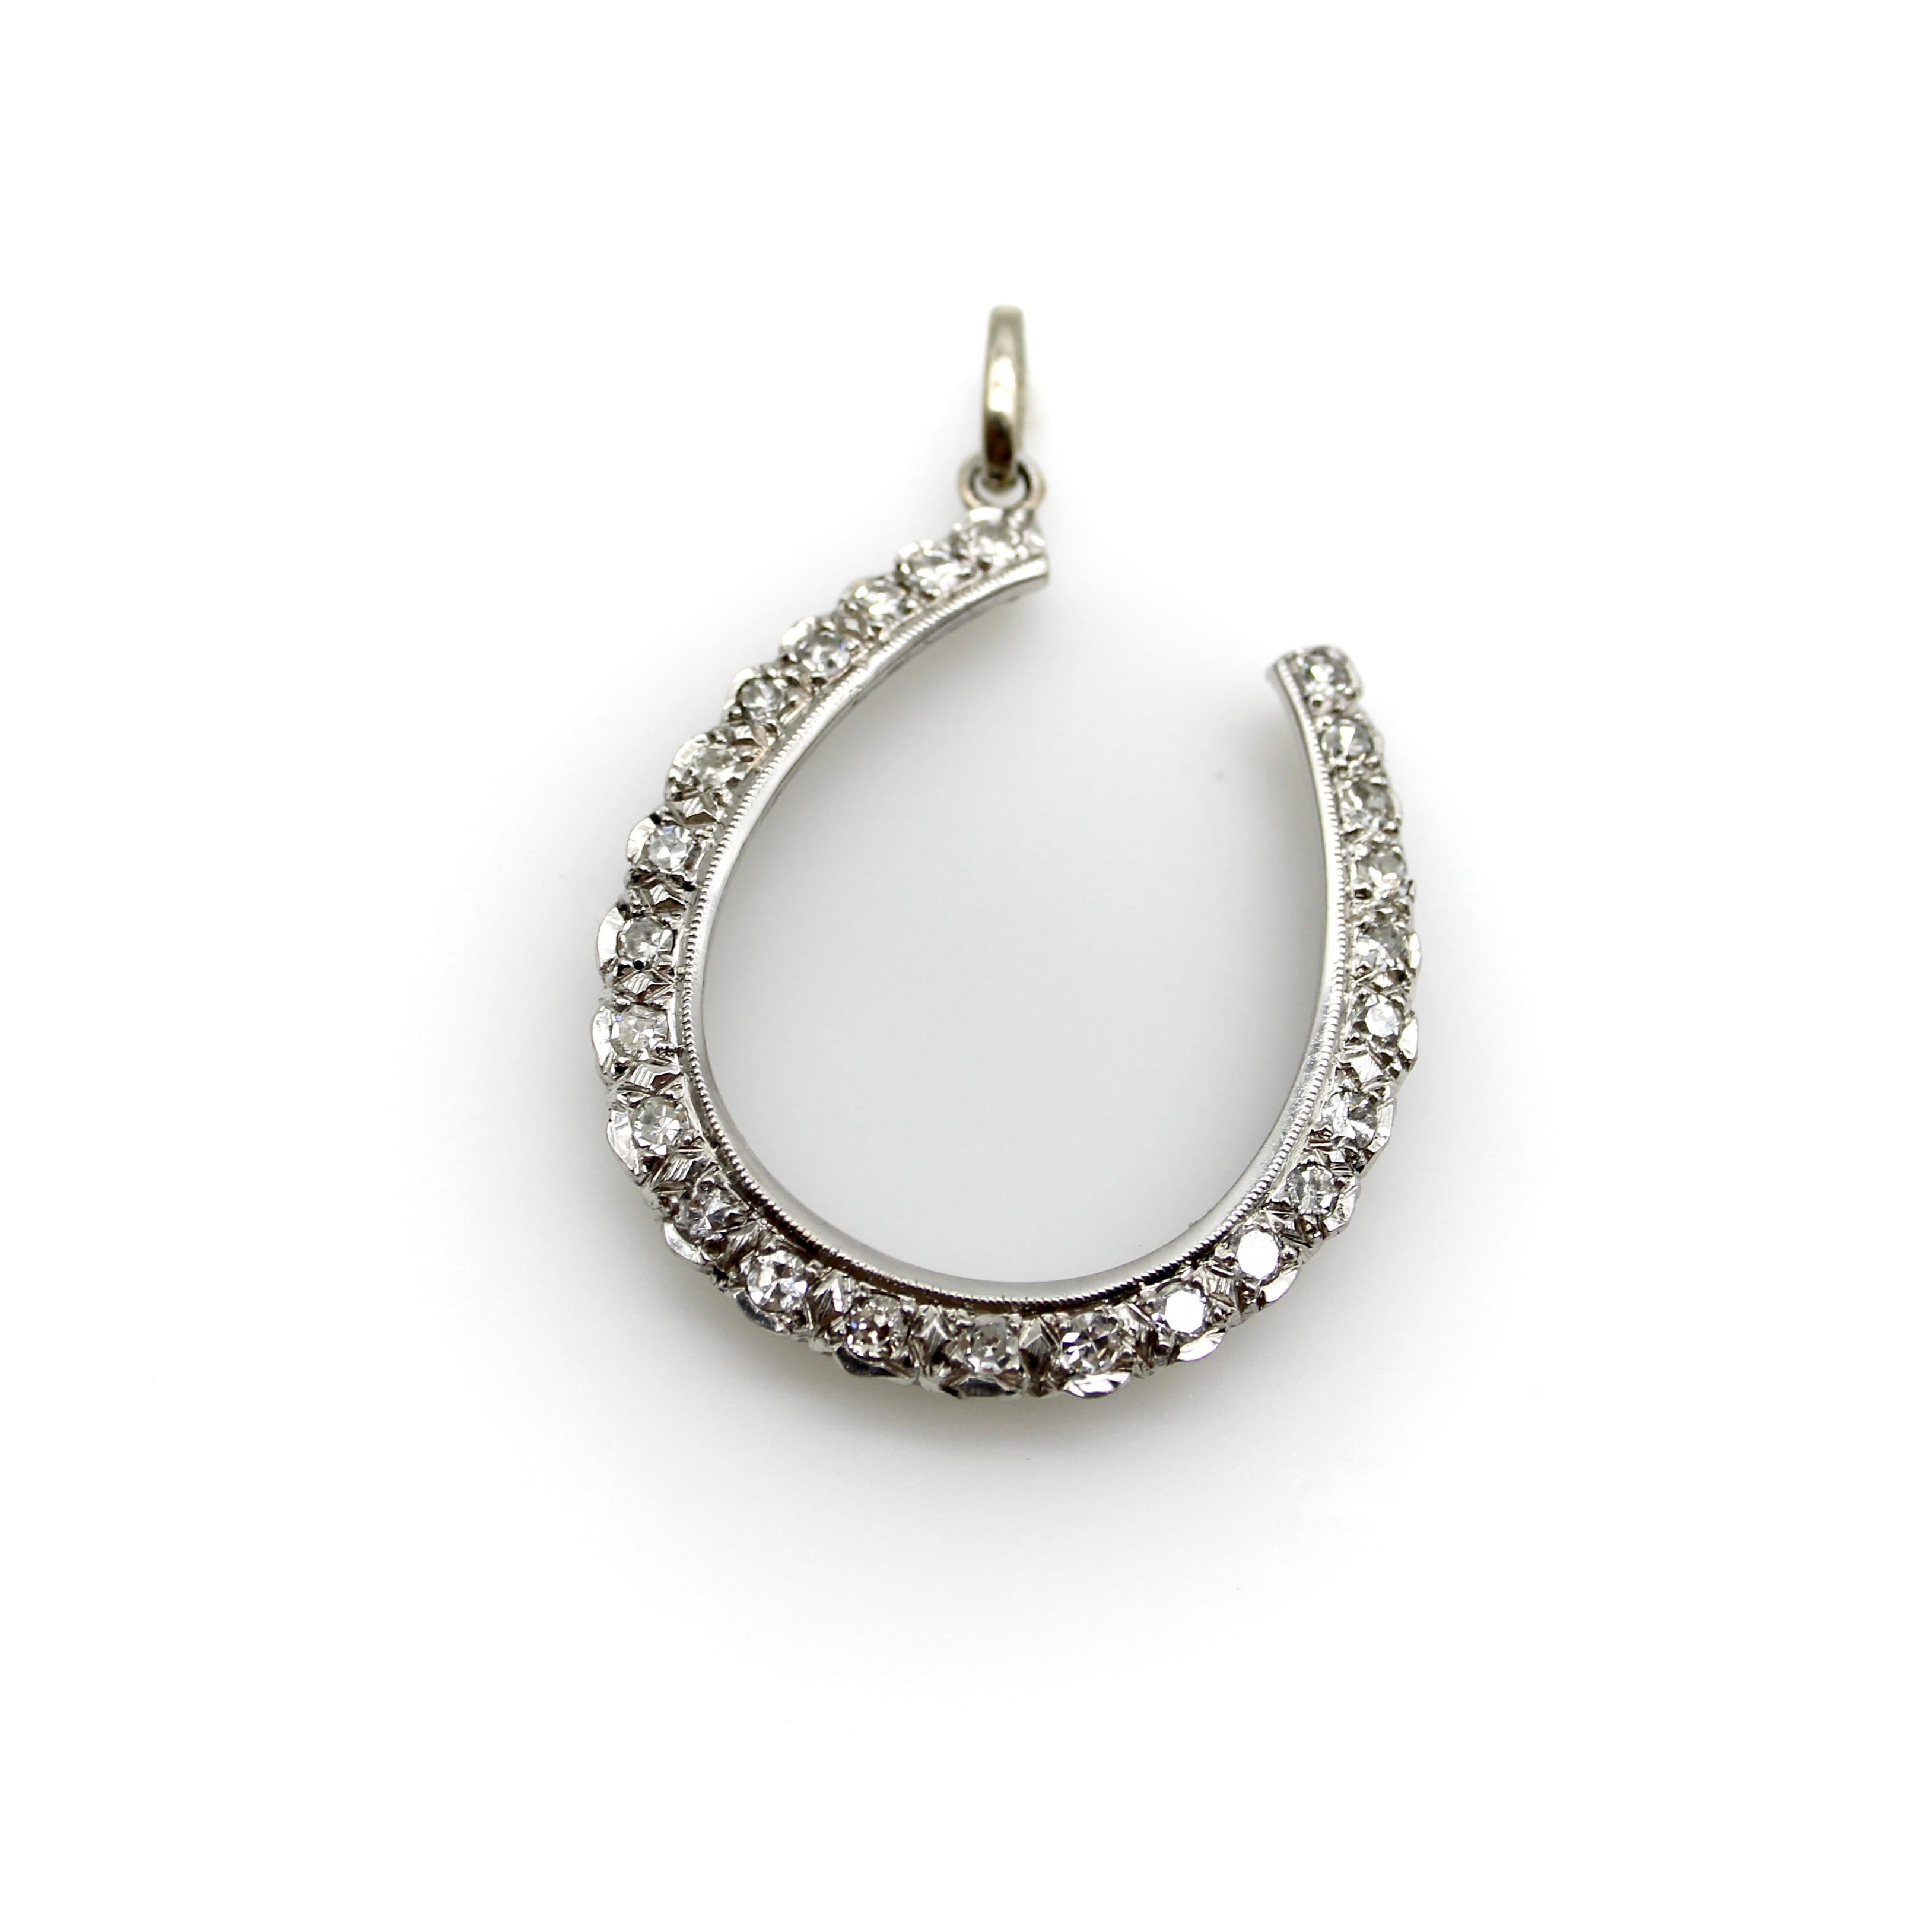 Circa 1900, this 12k gold lucky horseshoe pendant contains 25 sparkling single cut diamonds bead set with bright cut work. The setting has scalloped edges along the bottom outside border; the inside border is a nice clean line that balances the